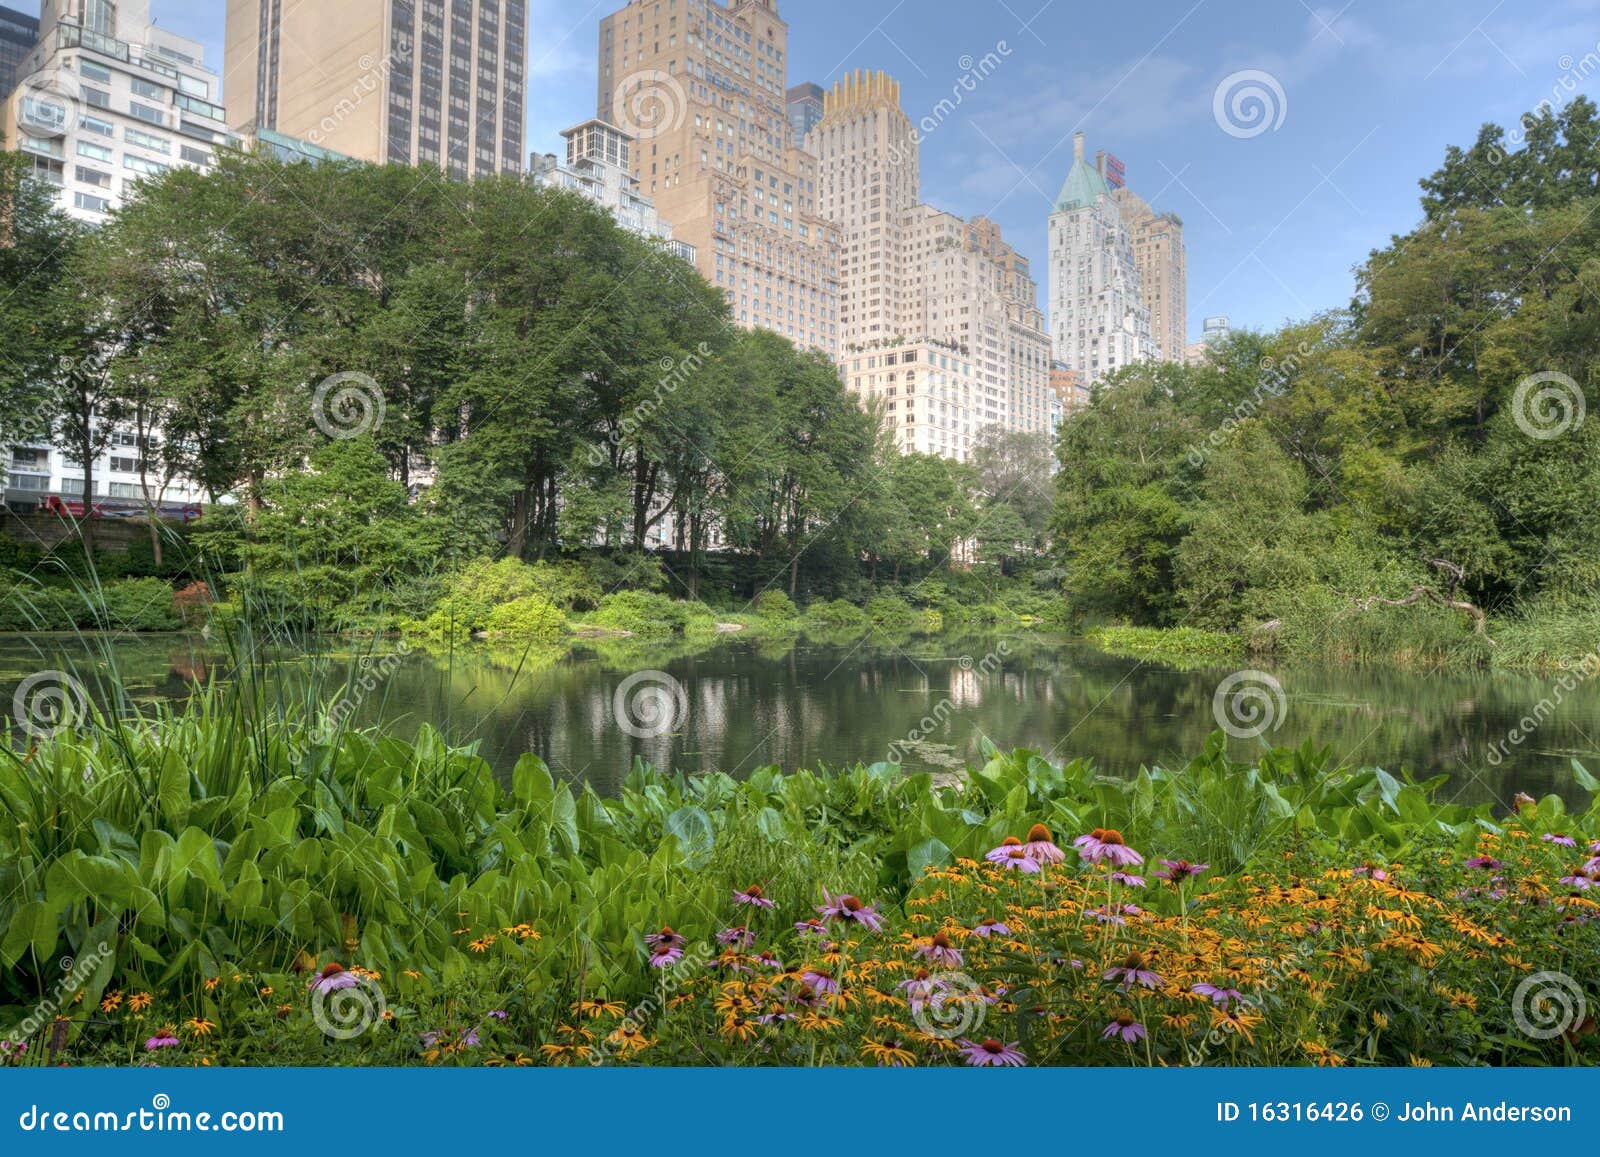 Central Park at the pond stock photo. Image of gapstow - 16316426